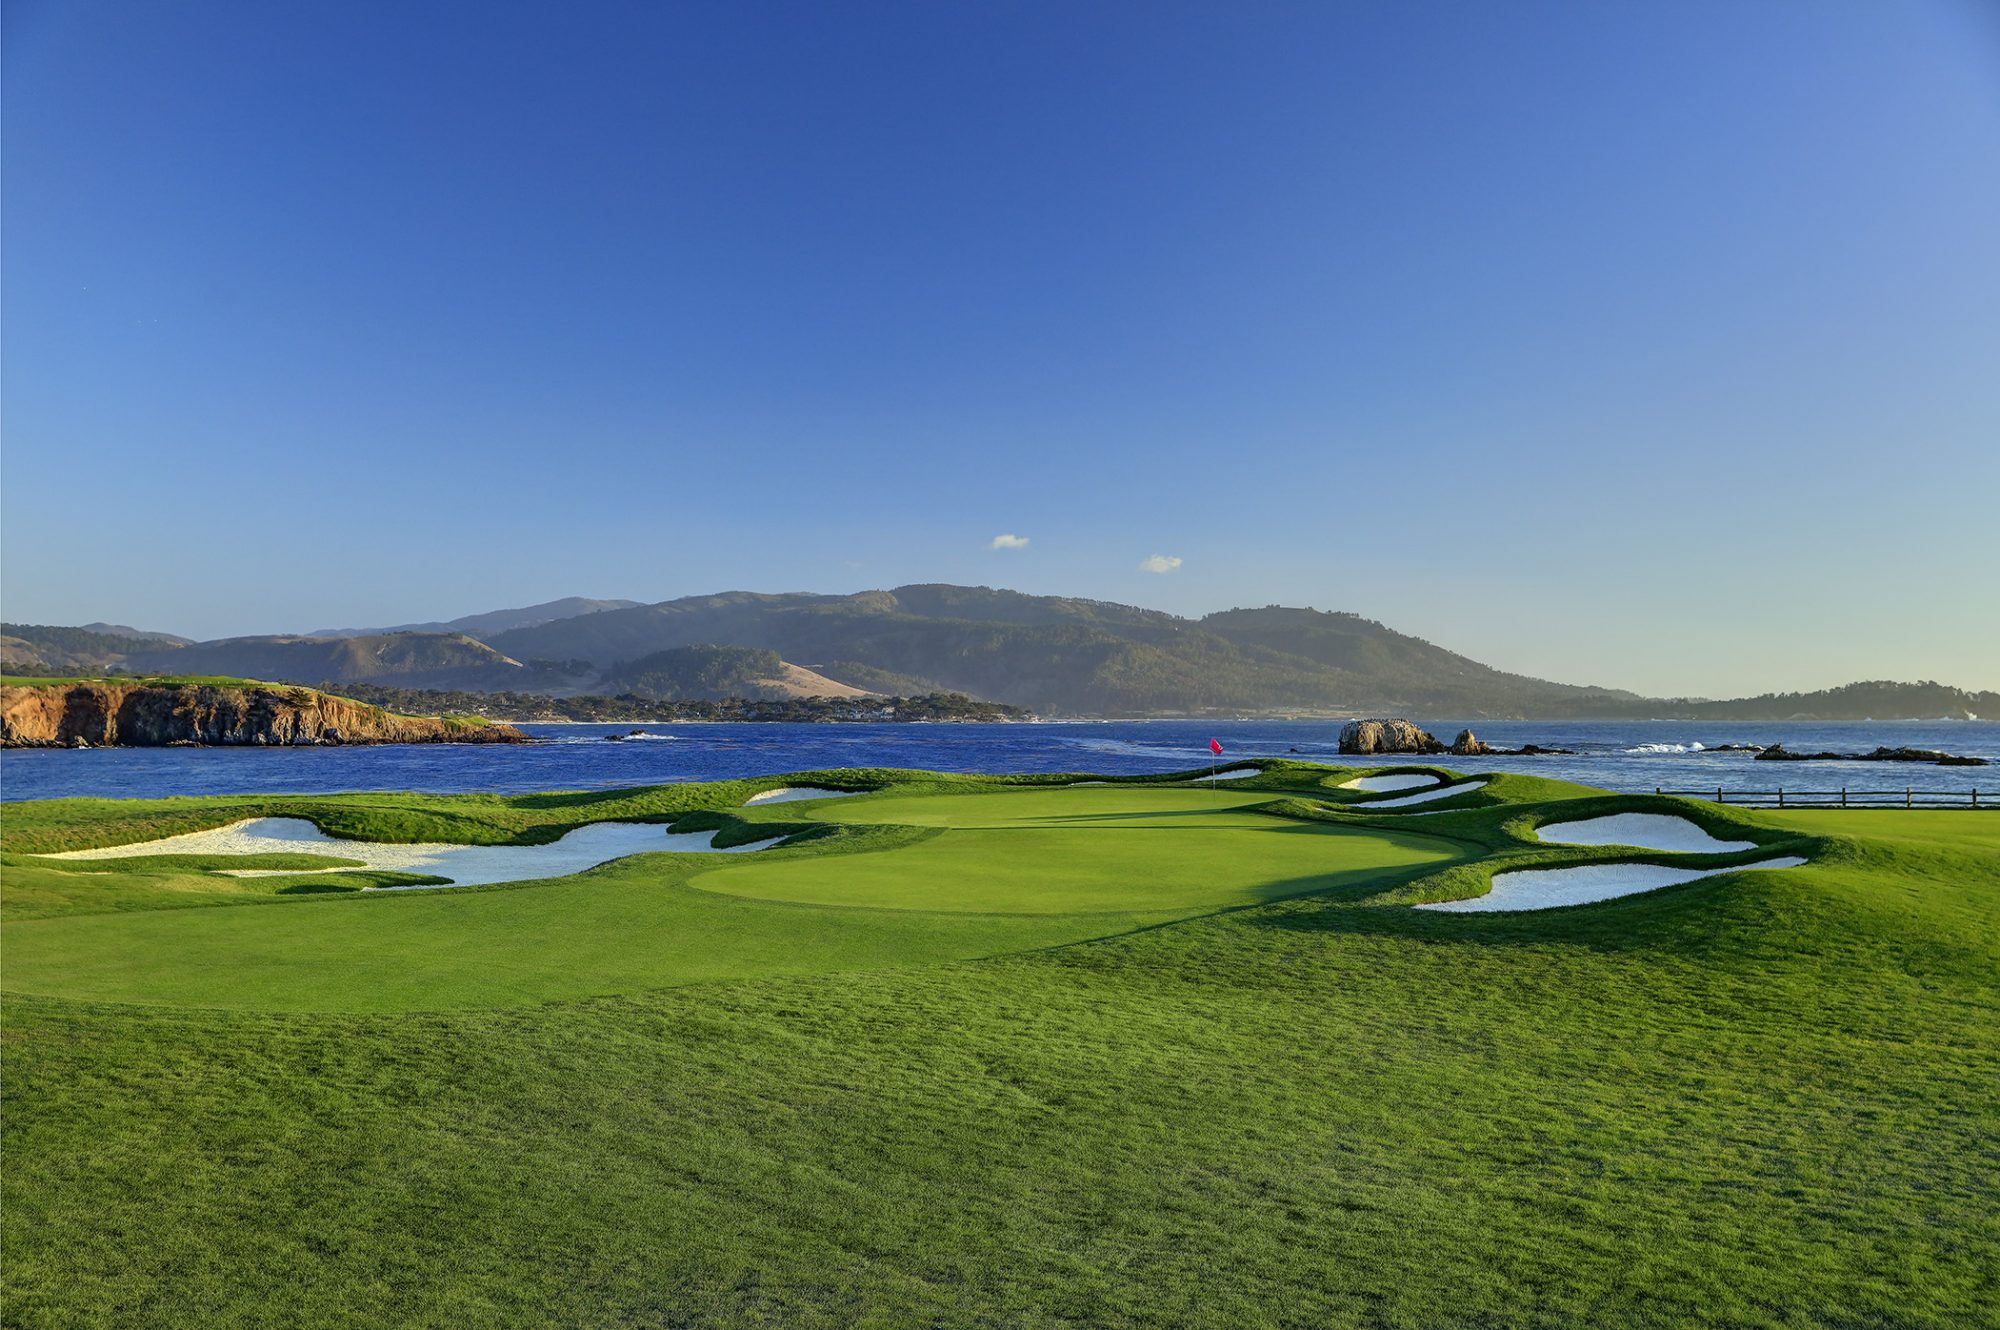 What's New About the Restored 17th Green at Pebble Beach